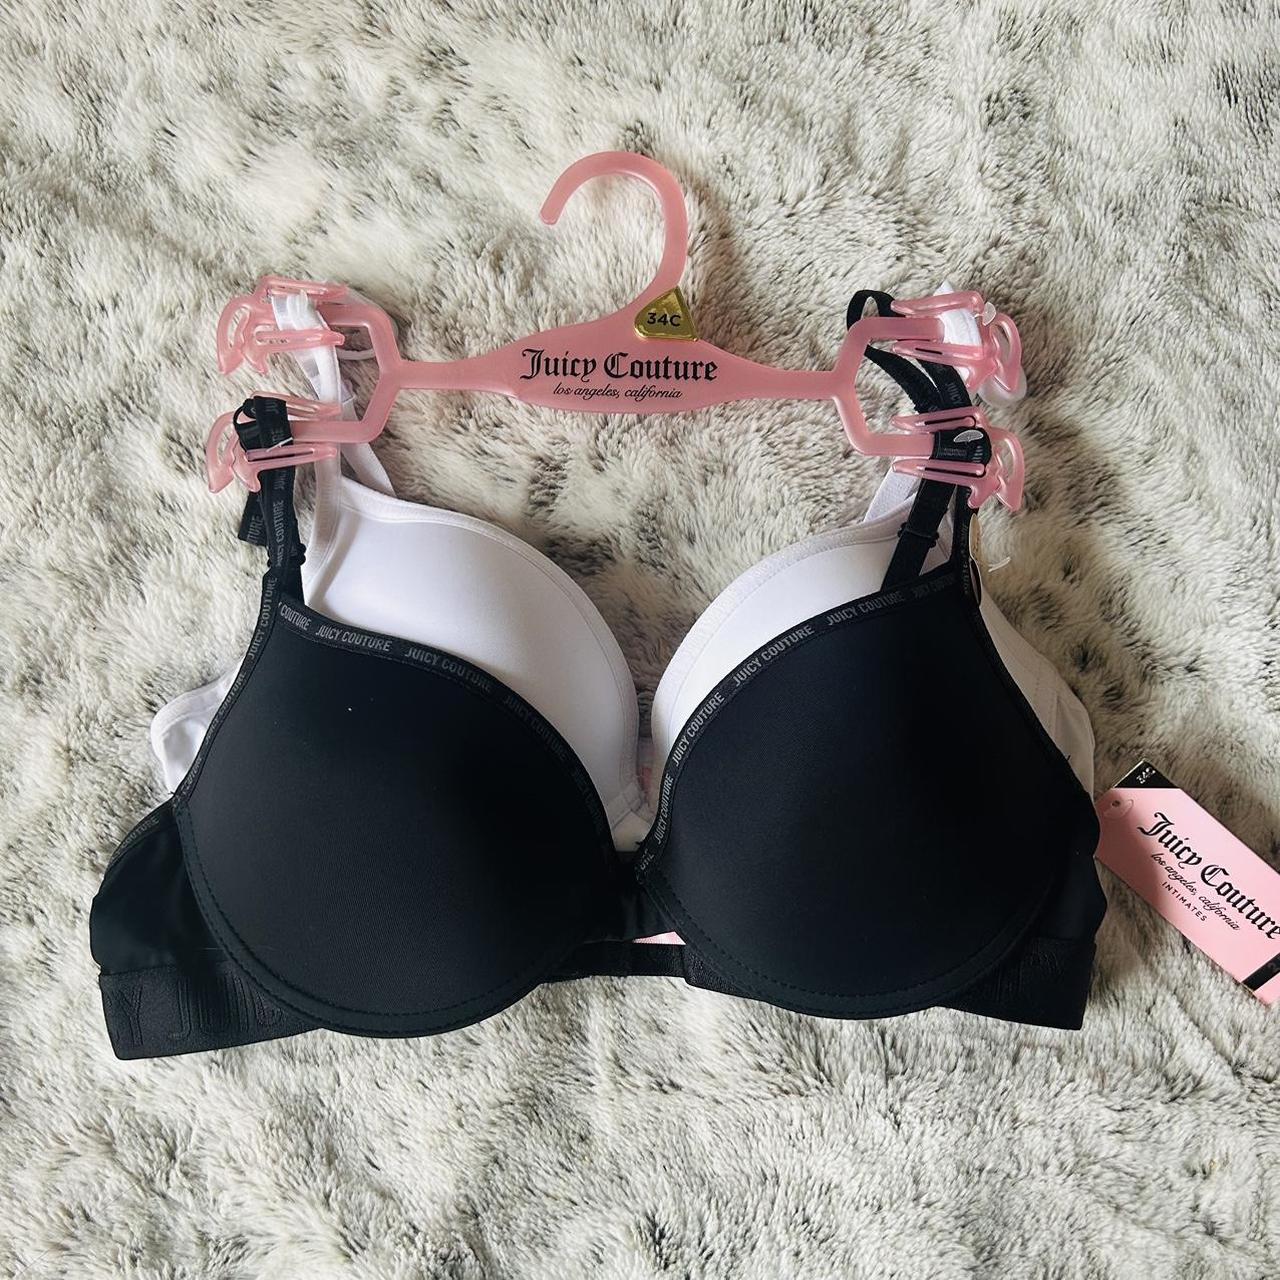 juicy couture 2 pack bra, nwt !, size 34c